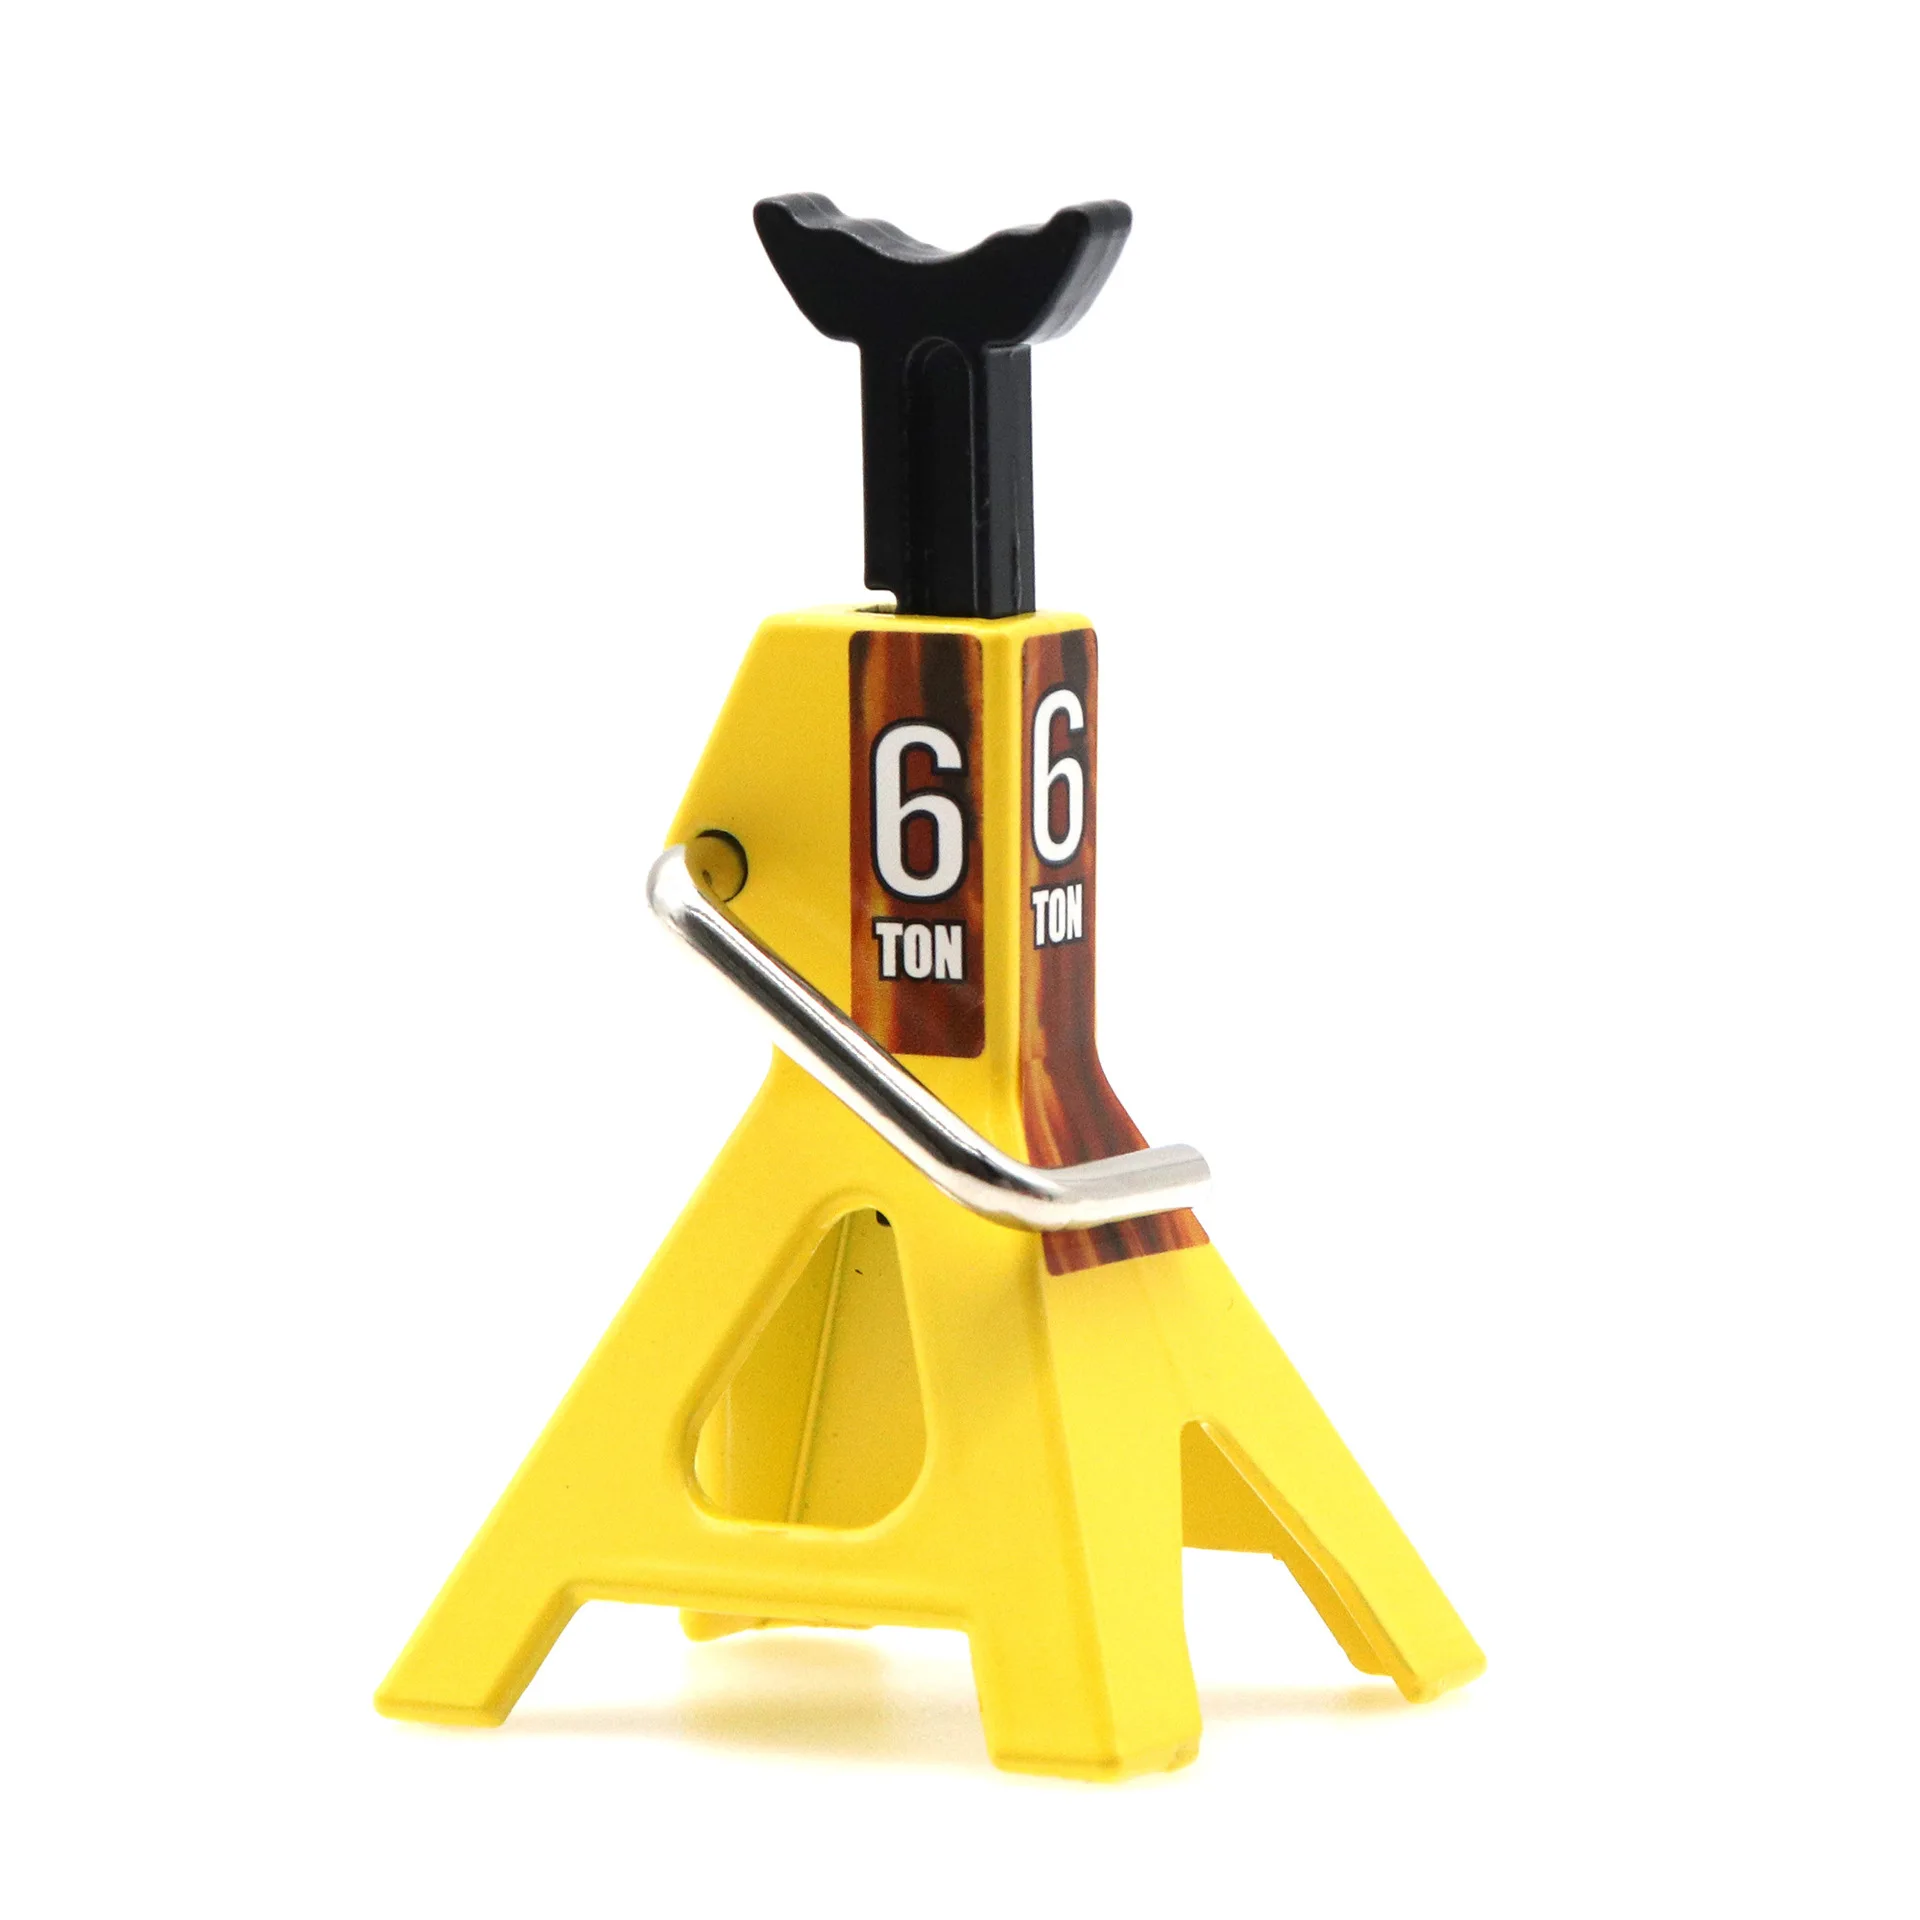 Toy Metal 6Ton Lifting Jack Adjustable Height Lifting Jack Decoration Accessories Compatible with SCX10 TRX4 D90 1/10 RC Crawler RC Car Jack Stand Yellow 